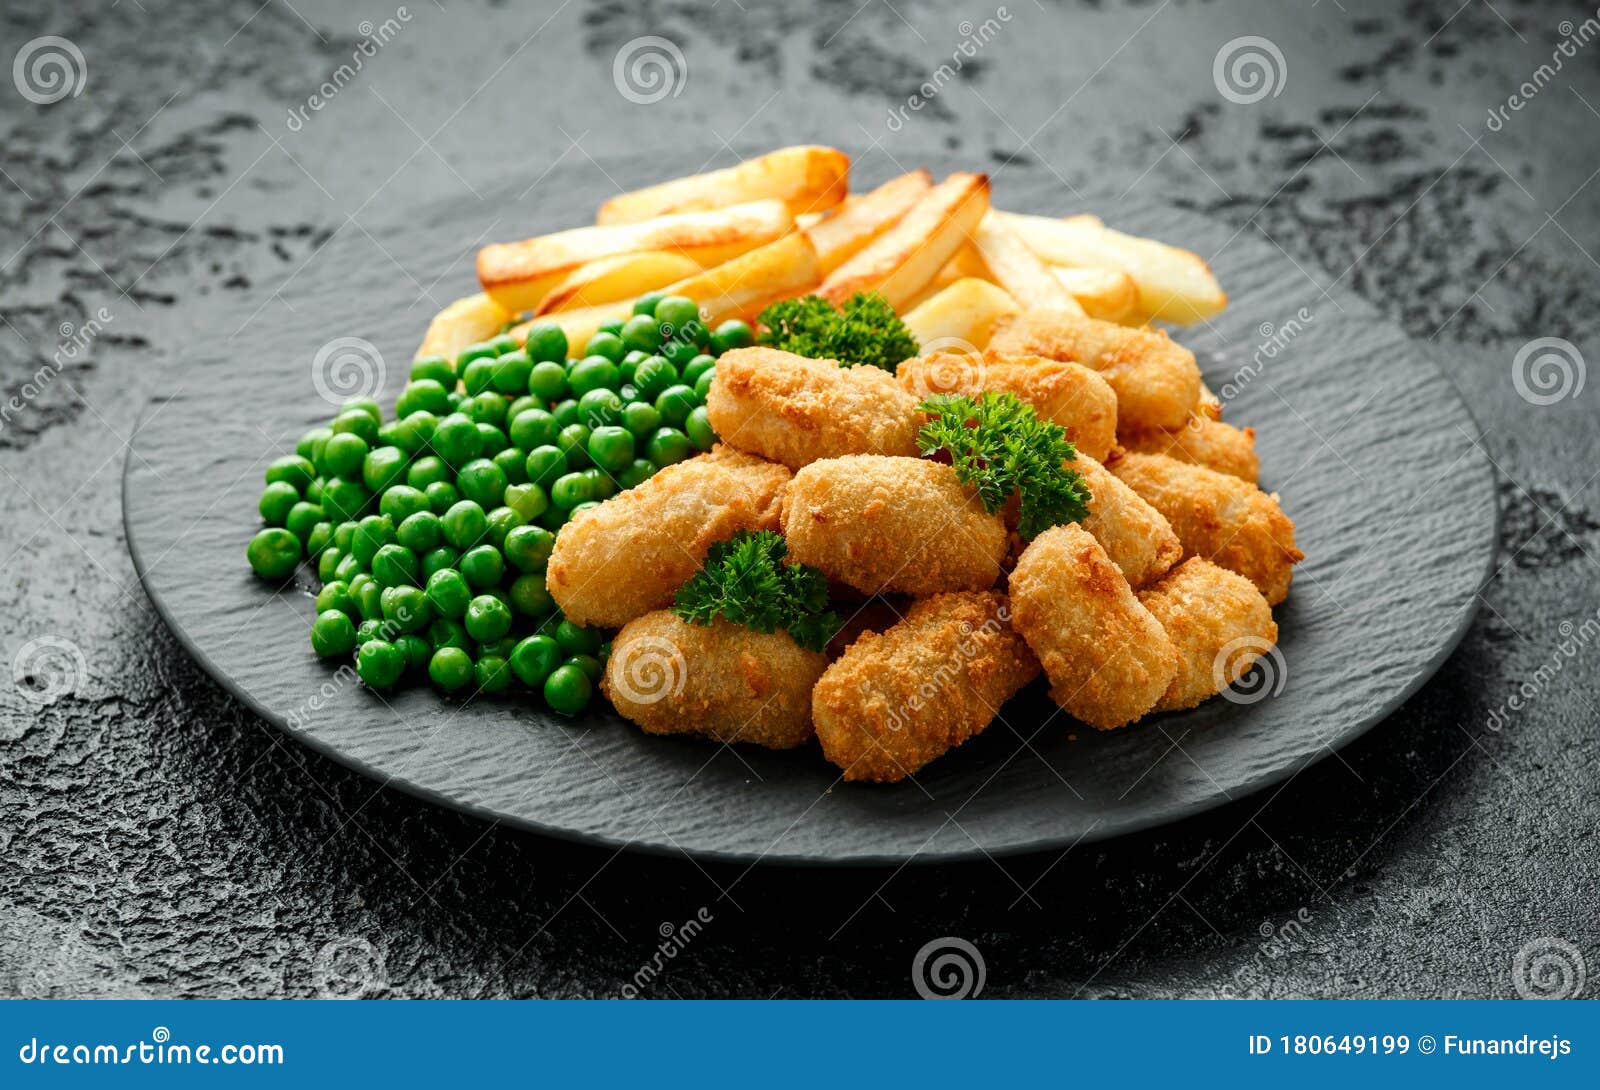 crispy battered scampi nuggets served on slate plate with potato chips and green peas